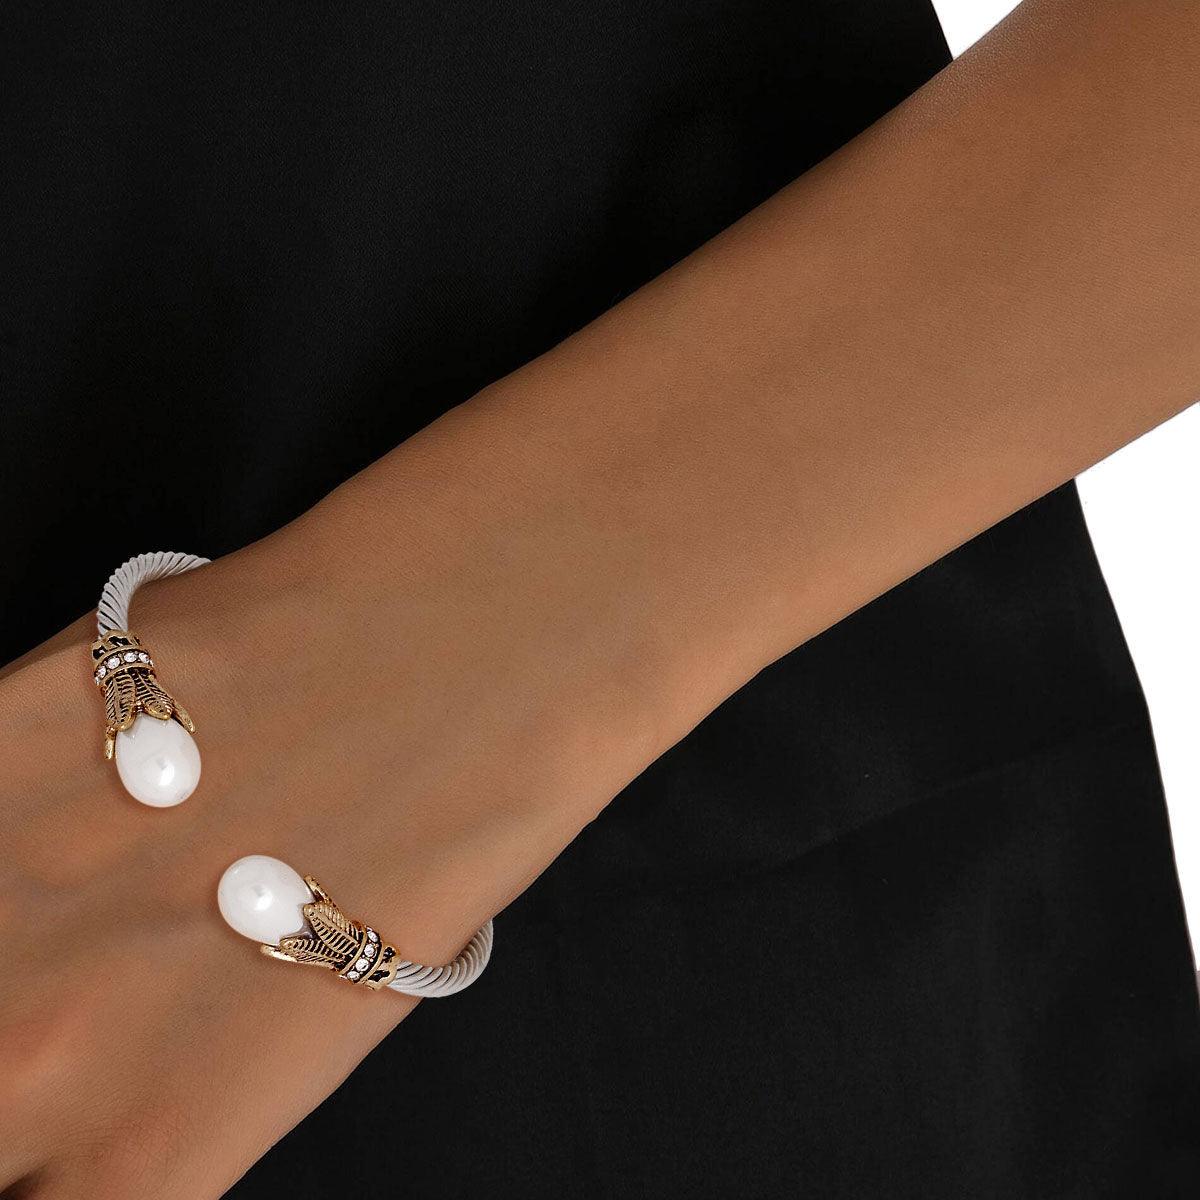 Elegant Pearl Accent Cuff Bracelet - Get the Perfect Burnished Look!